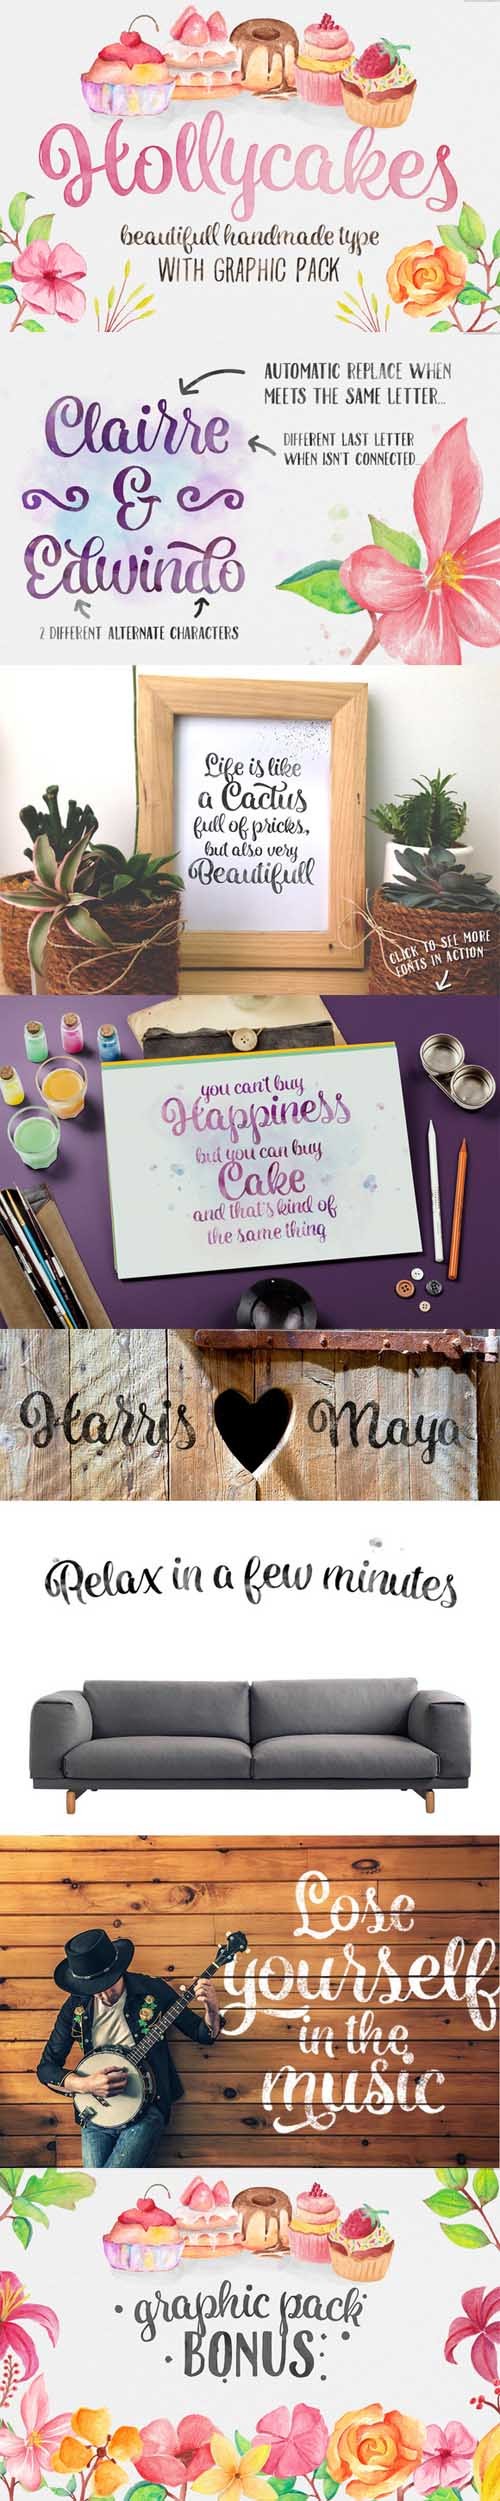 Hollycakes Fonts with Graphic Pack